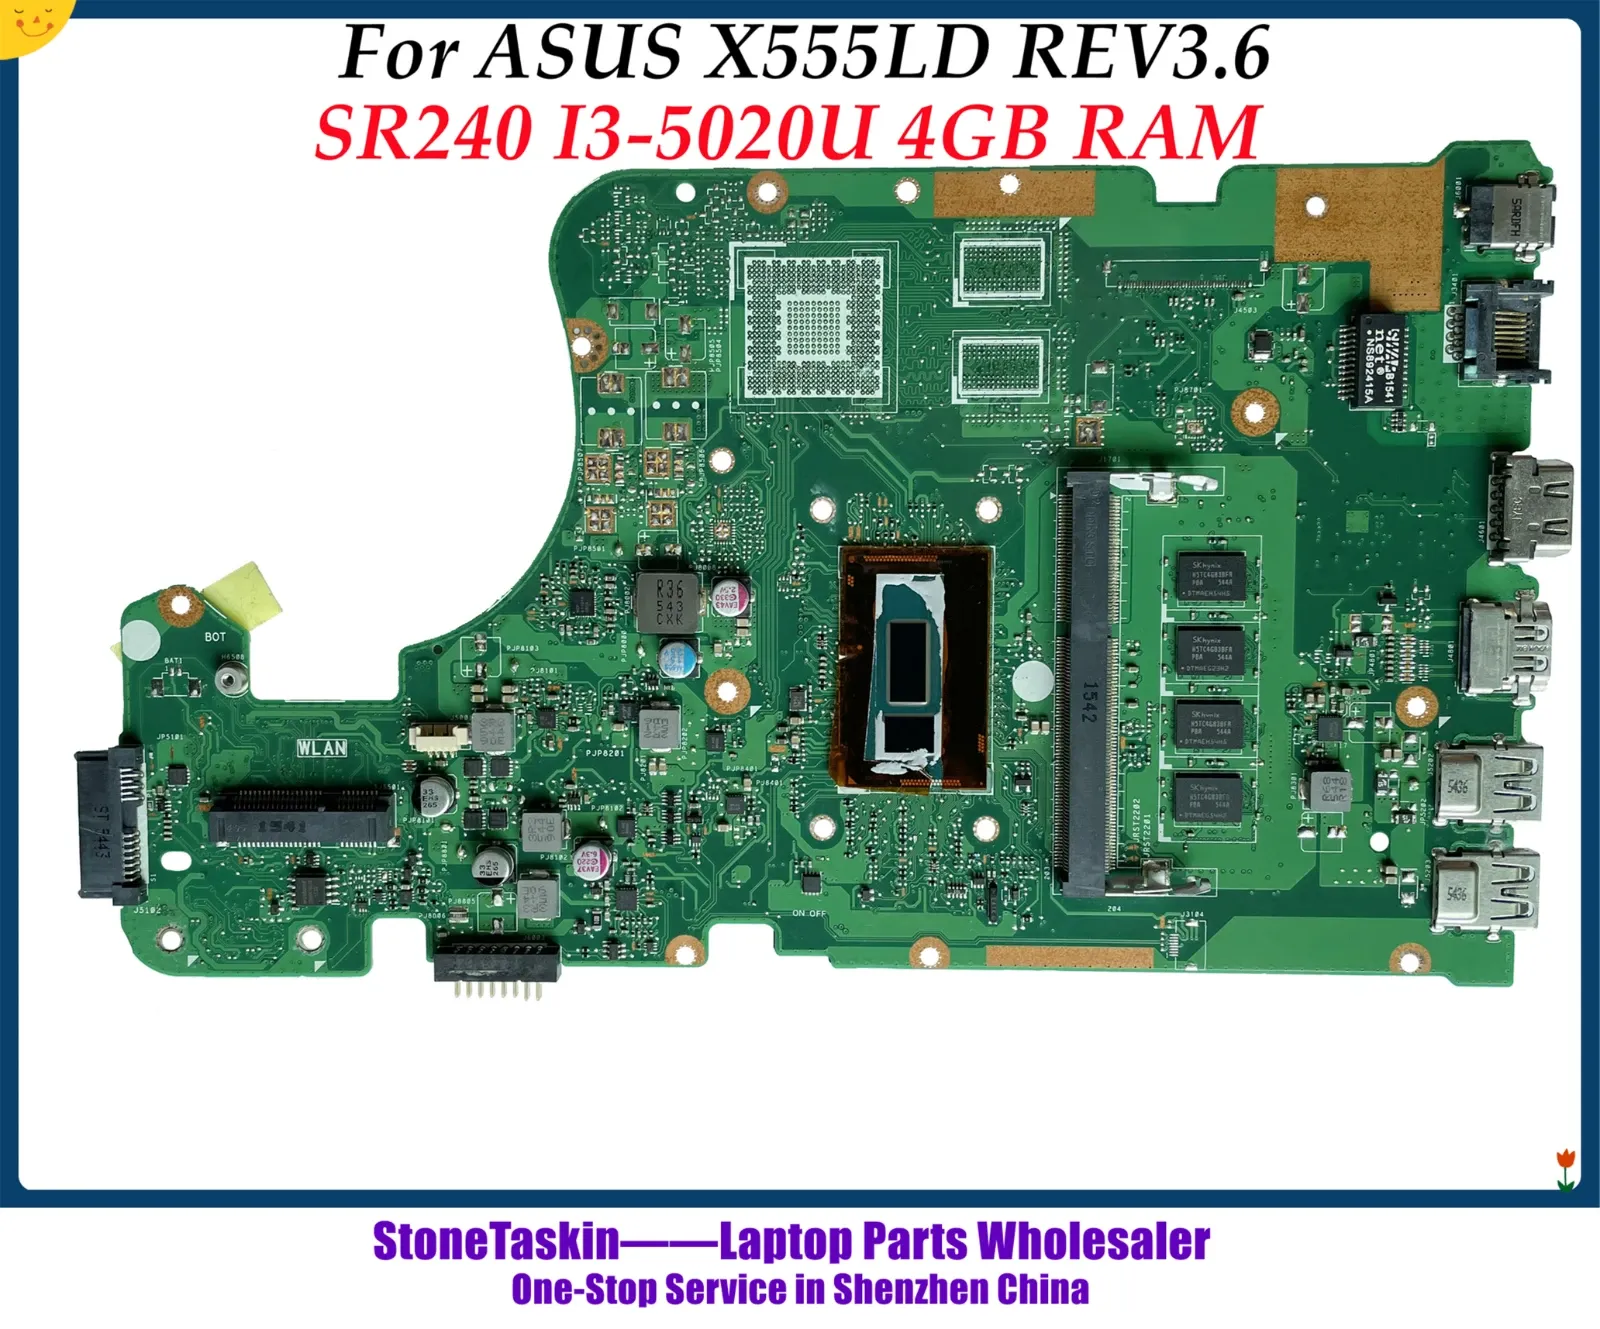 Motherboard High quality For ASUS X555LD REV3.6 Mainboard SR240 I35020U 4GB RAM Laptop Motherboard 100% Fully Tested